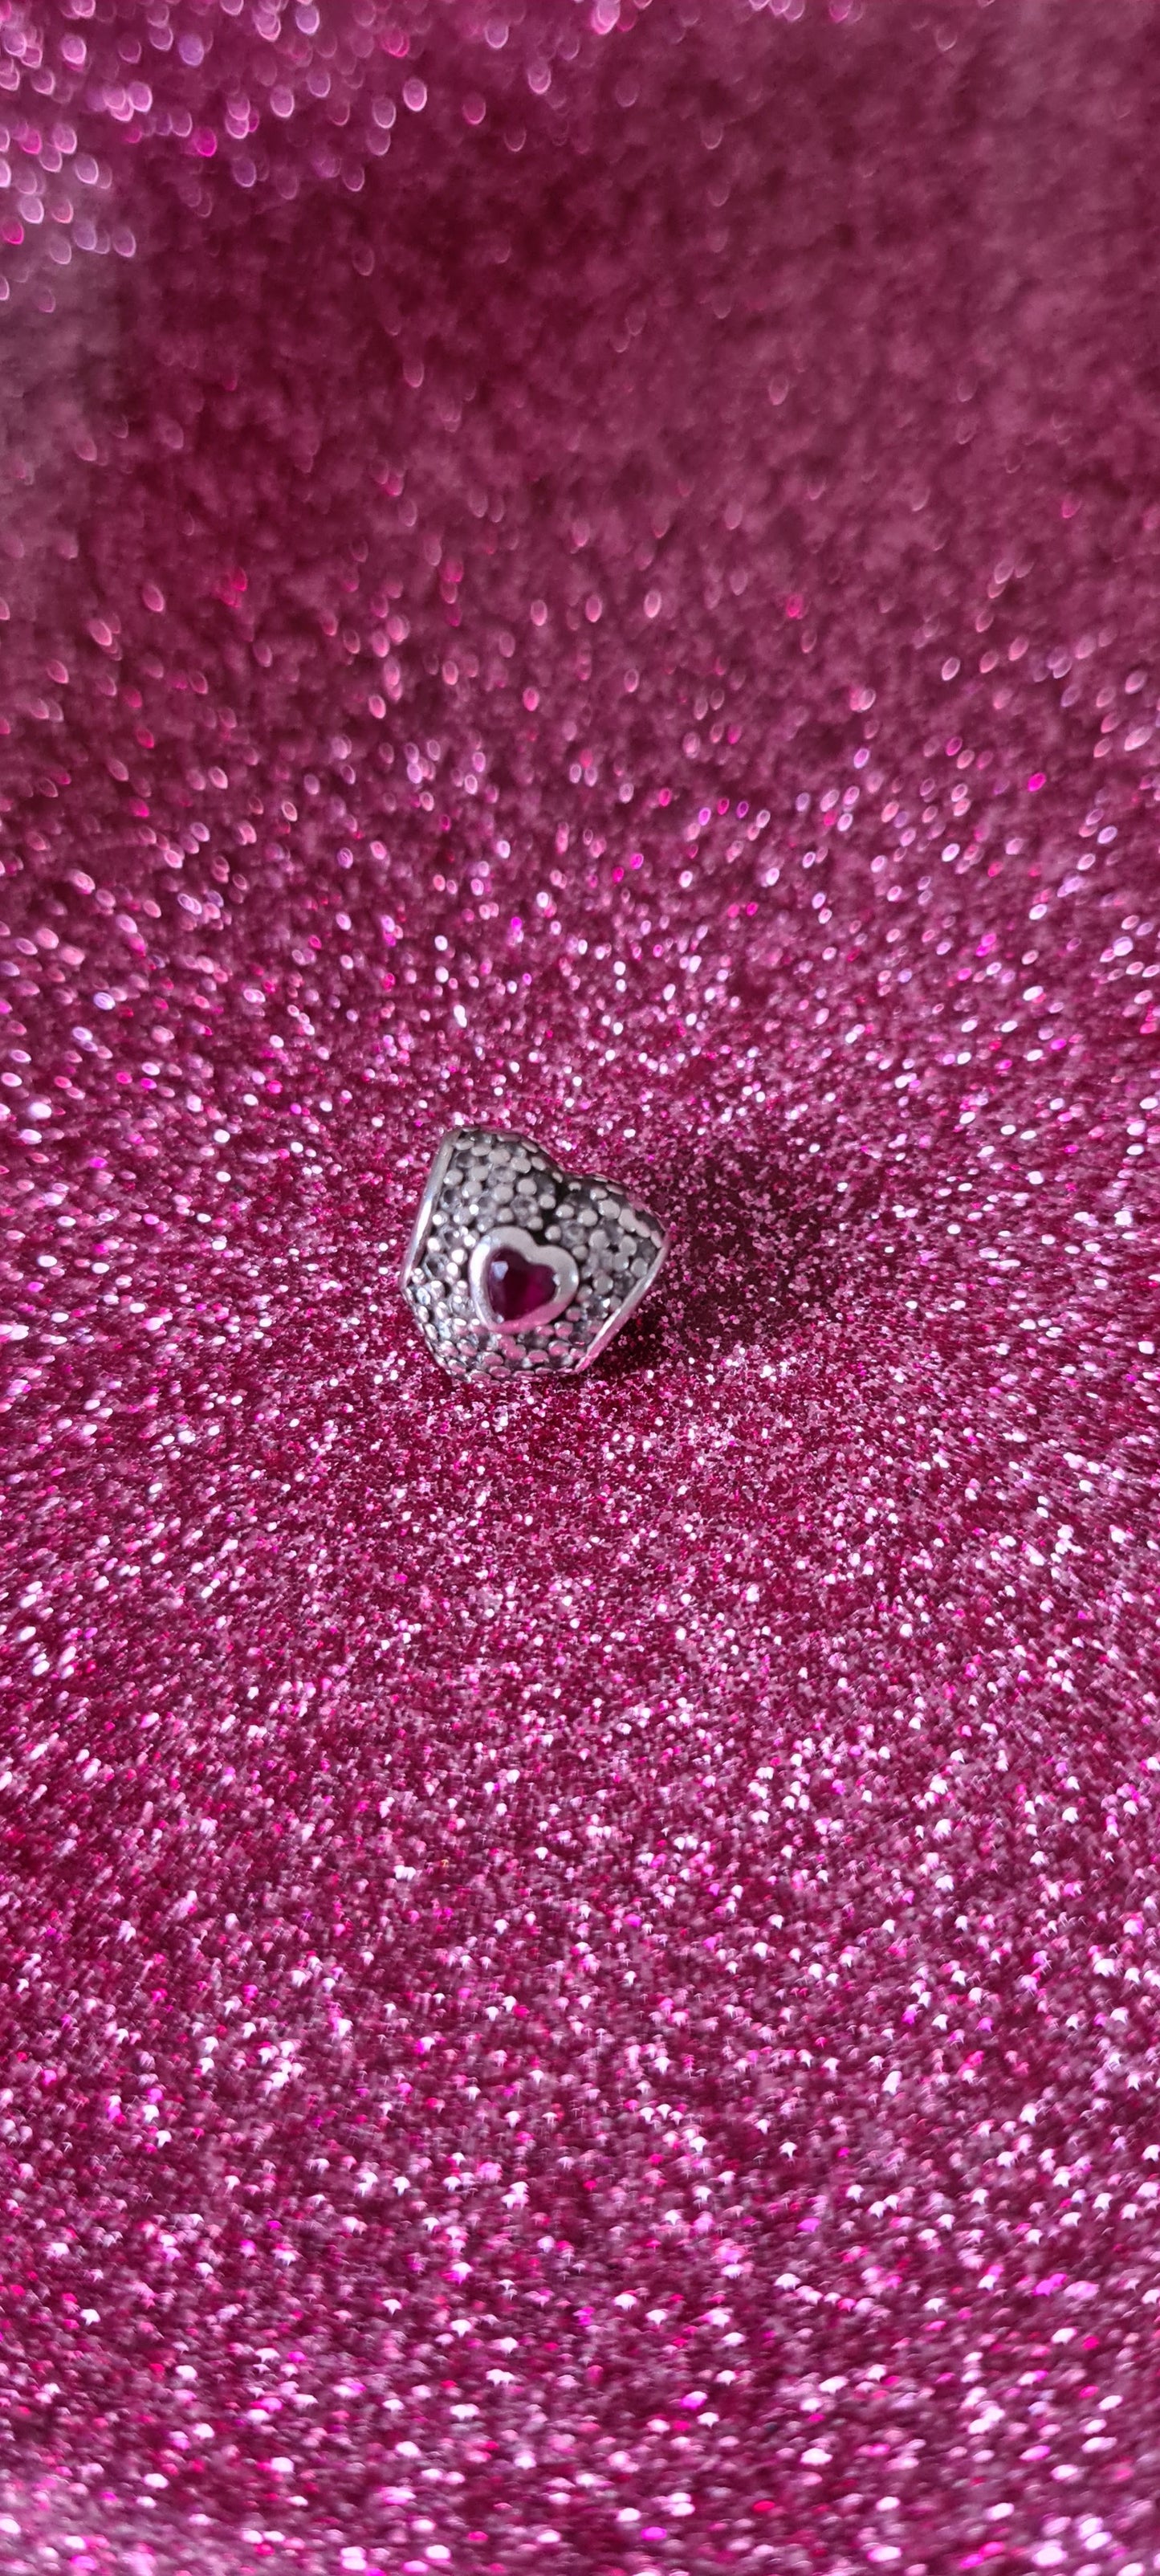 Genuine Pandora Pave Heart in A Heart Sparkle Clear Charm